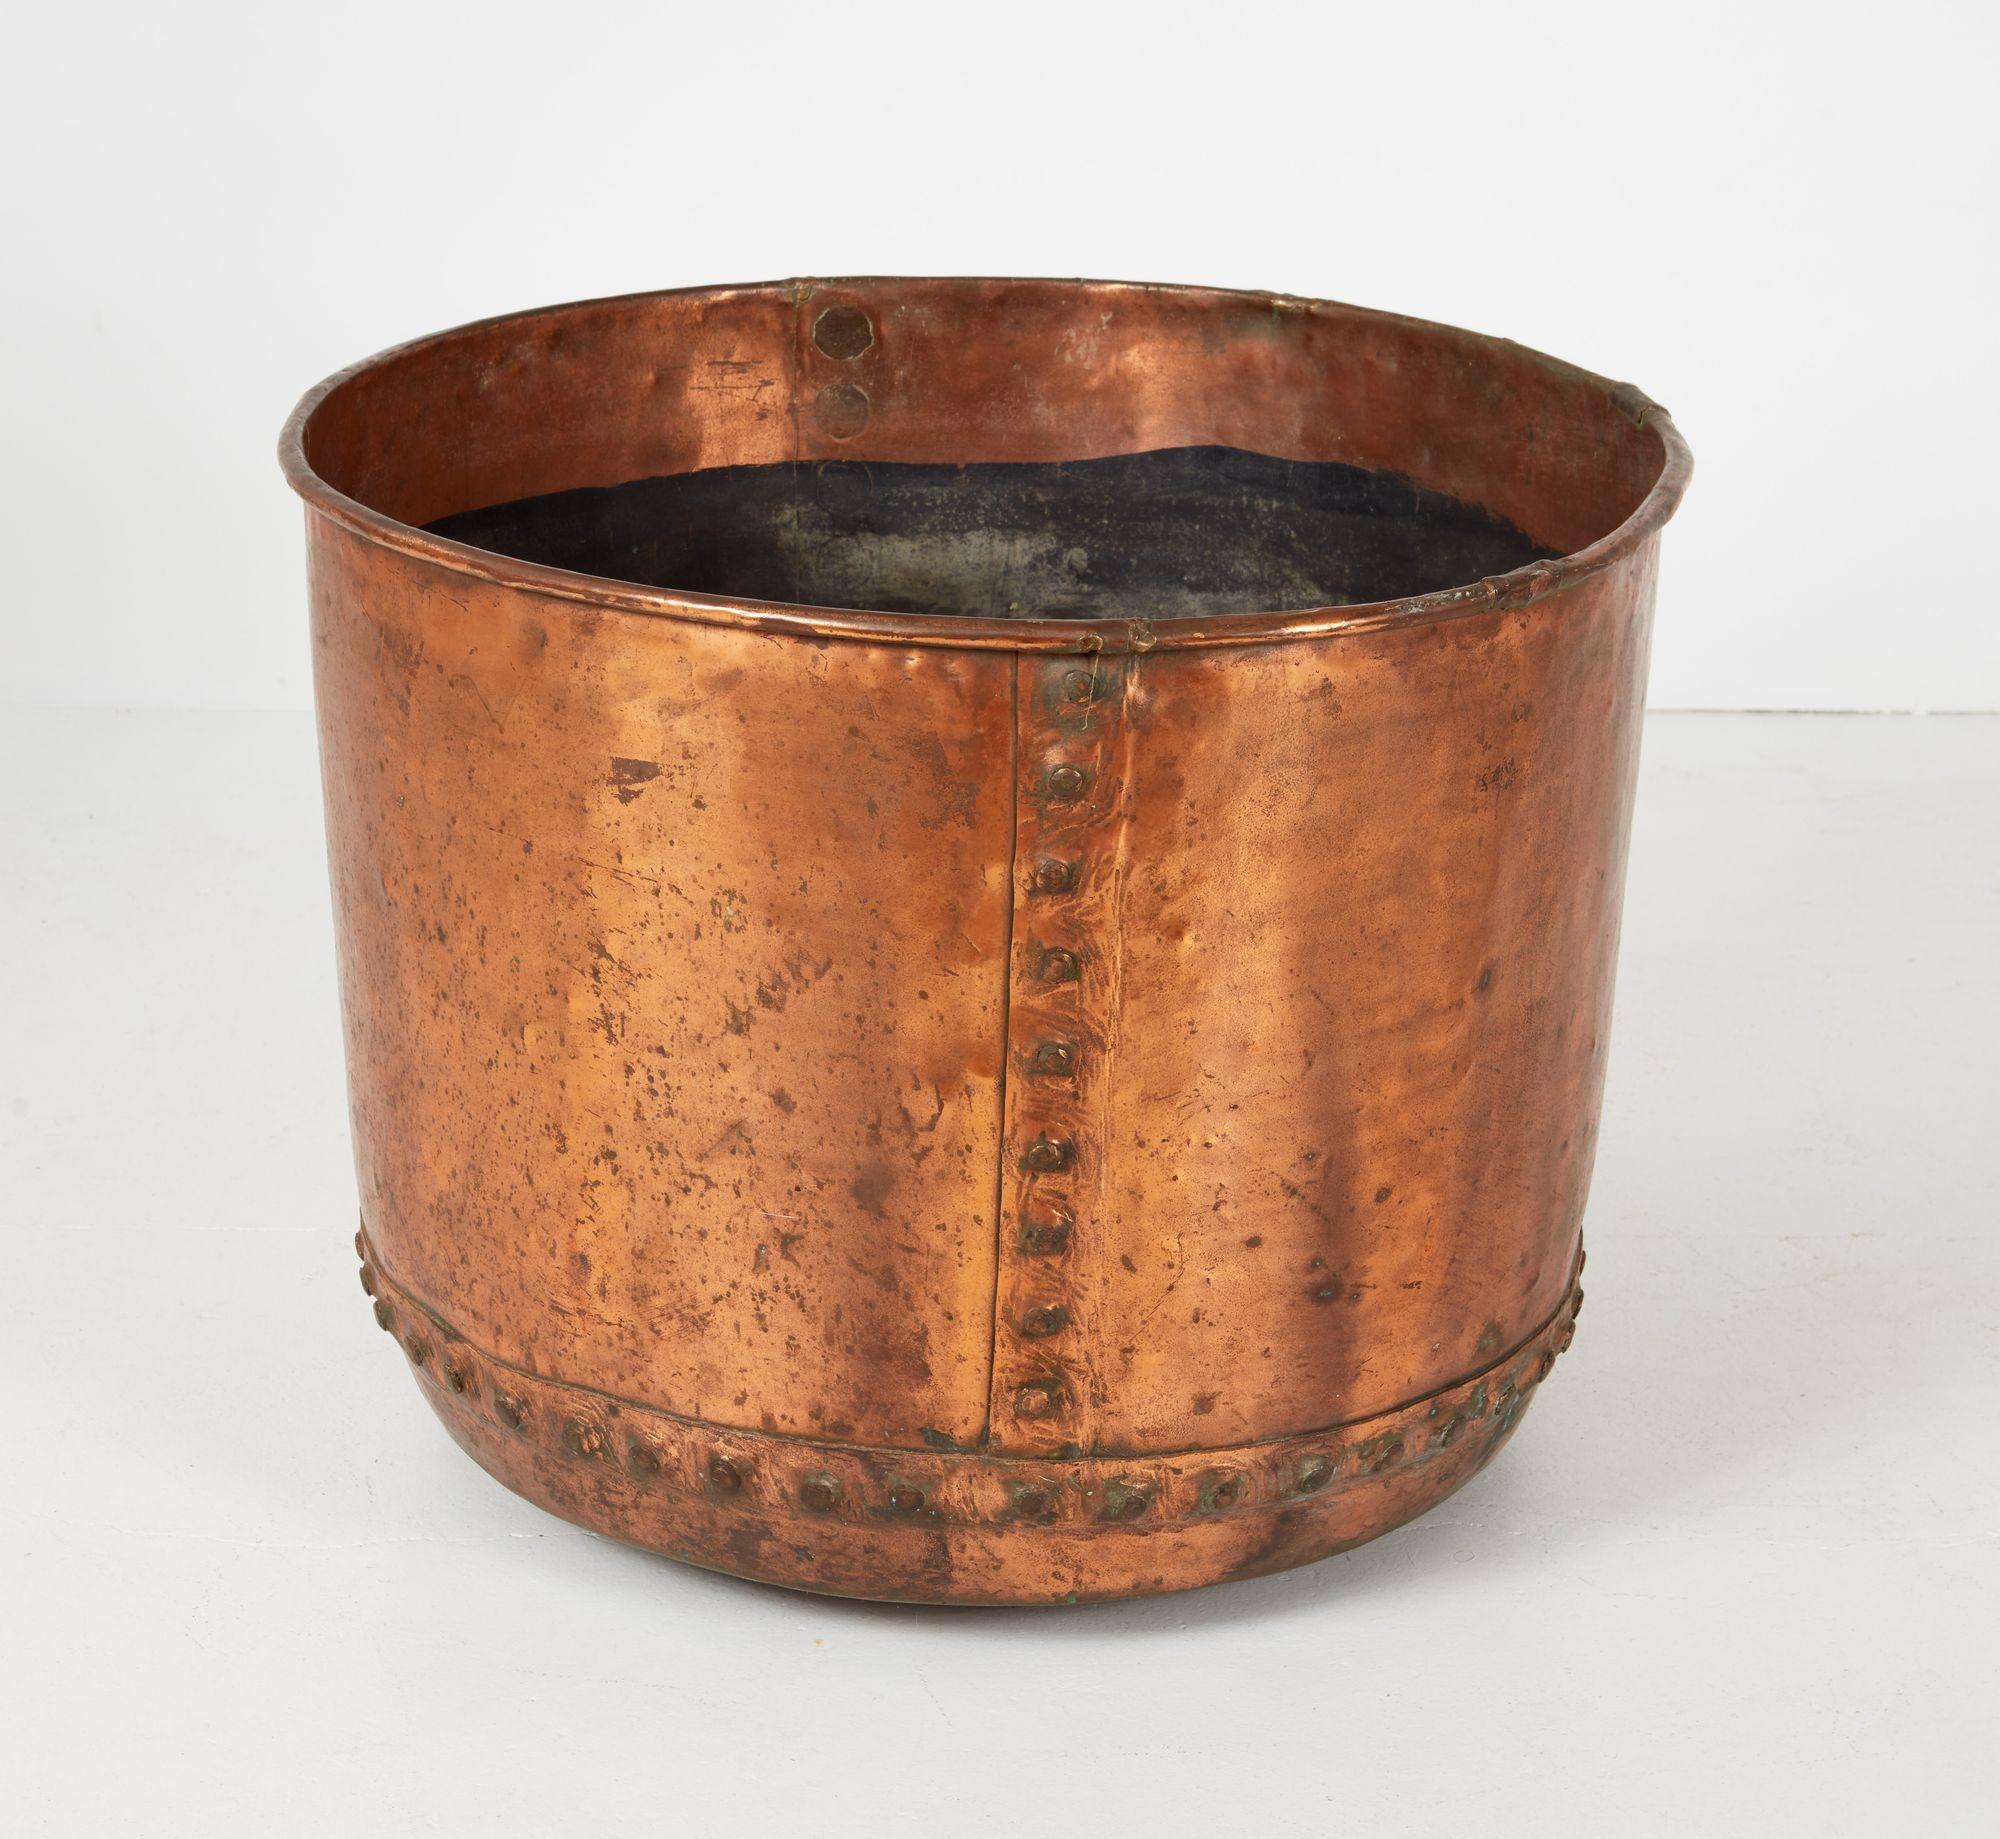 A large copper vessel, with rolled rim and gently canted sides, possessing functional and decorative riveted seams and being of particularly impressive circumference. Useful as a large log bin, an outdoor feature planter filled with tulip bulbs and